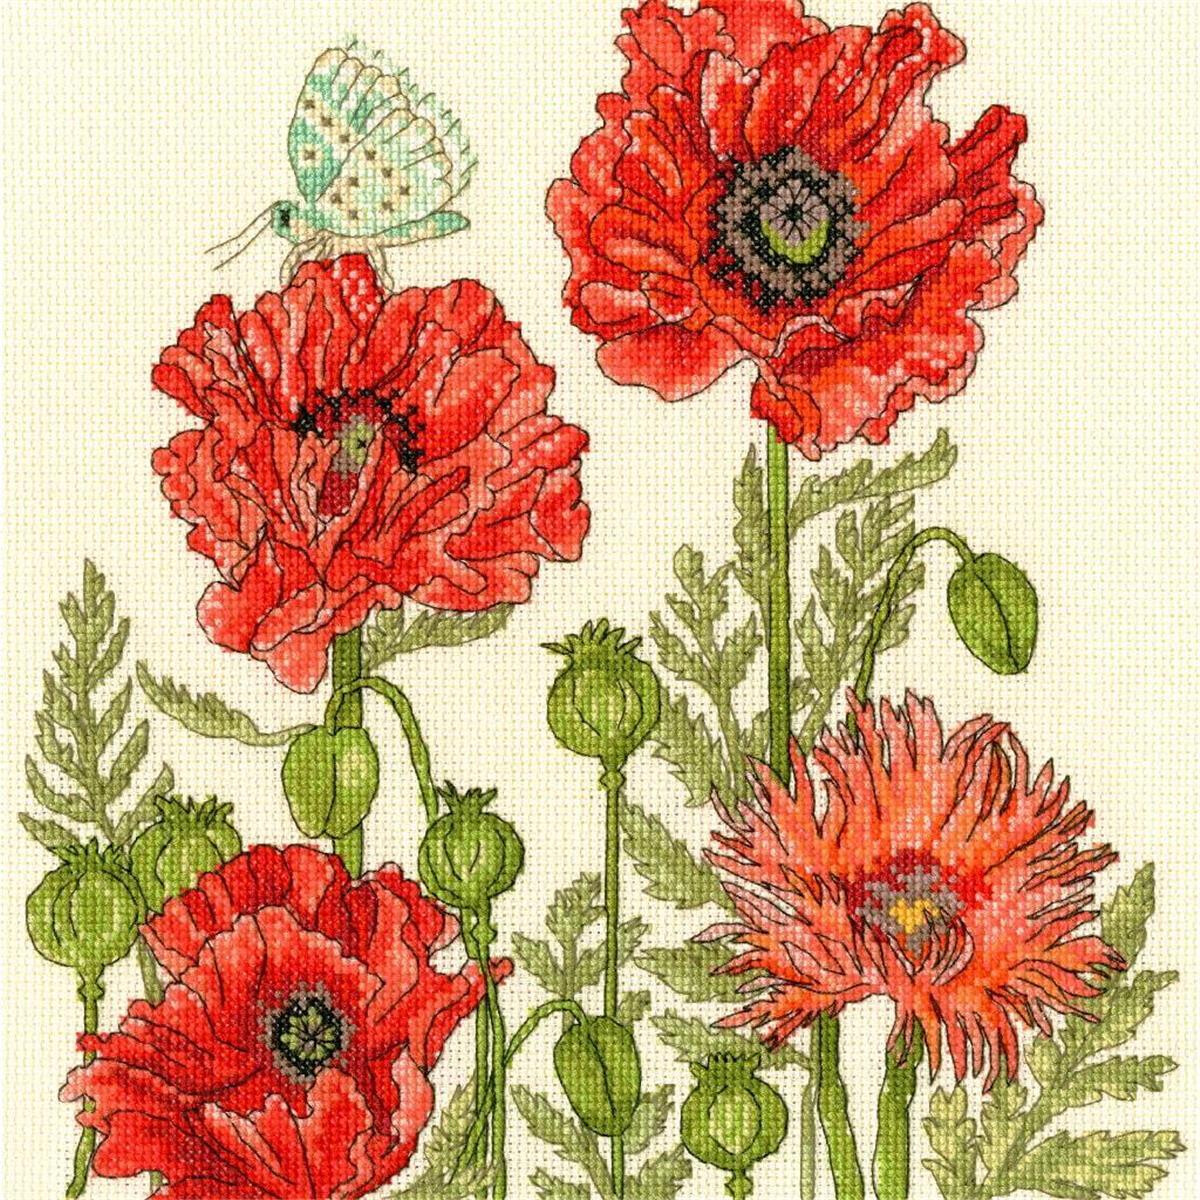 Bothy Threads counted cross stitch kit "Poppy...